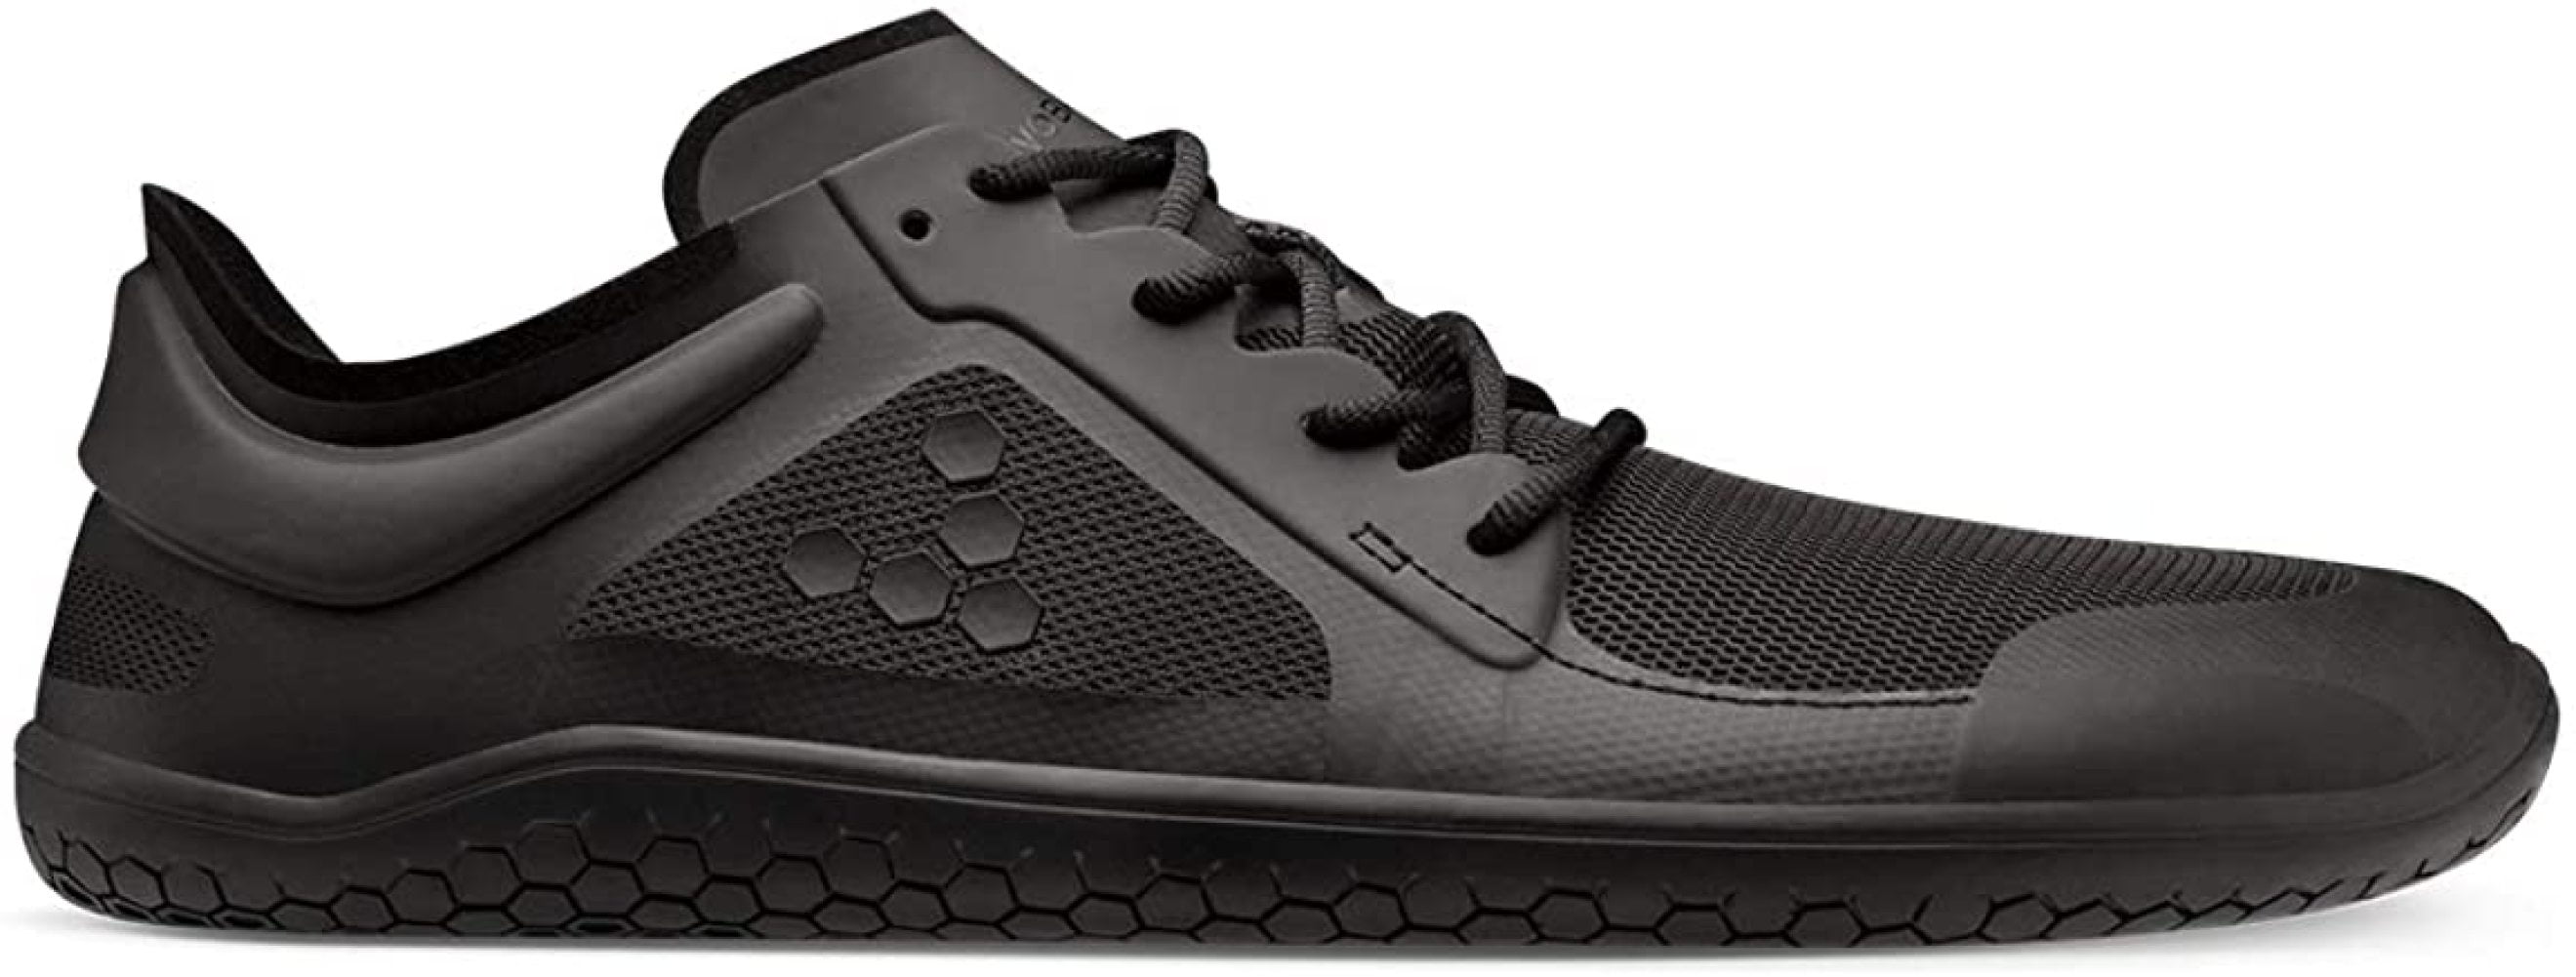 Vegan Light Movement Breathable Shoe with Barefoot Sole Vivobarefoot Primus Lite Womens 